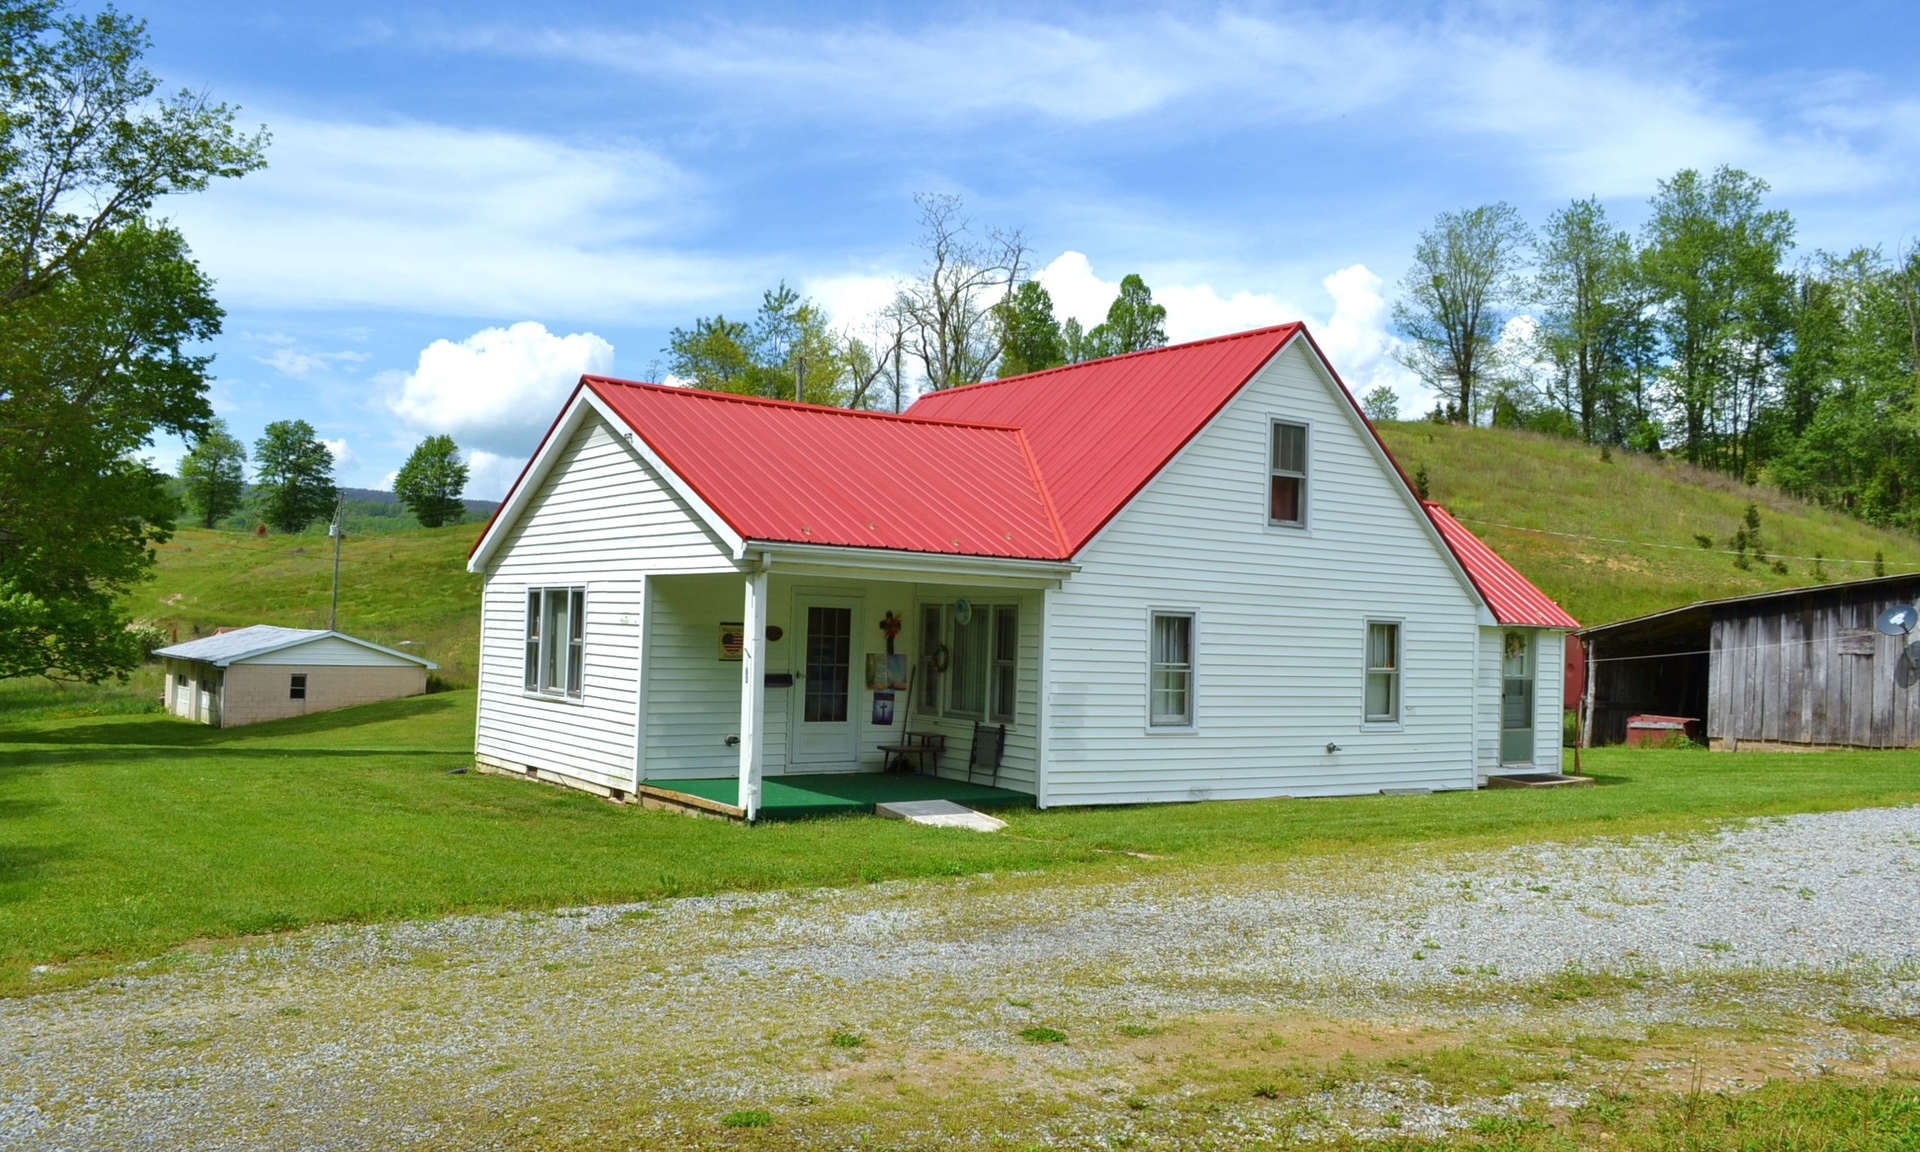 ATTENTION FARMERS, FIRST TIME HOME BUYERS, AND INVESTORS! Take a look at this sweet 442+ acre farm complete with cozy farmhouse, garage. big barn, multiple outbuildings, mountain streams, pastures, woodlands, several building sites, and lots of wildlife.